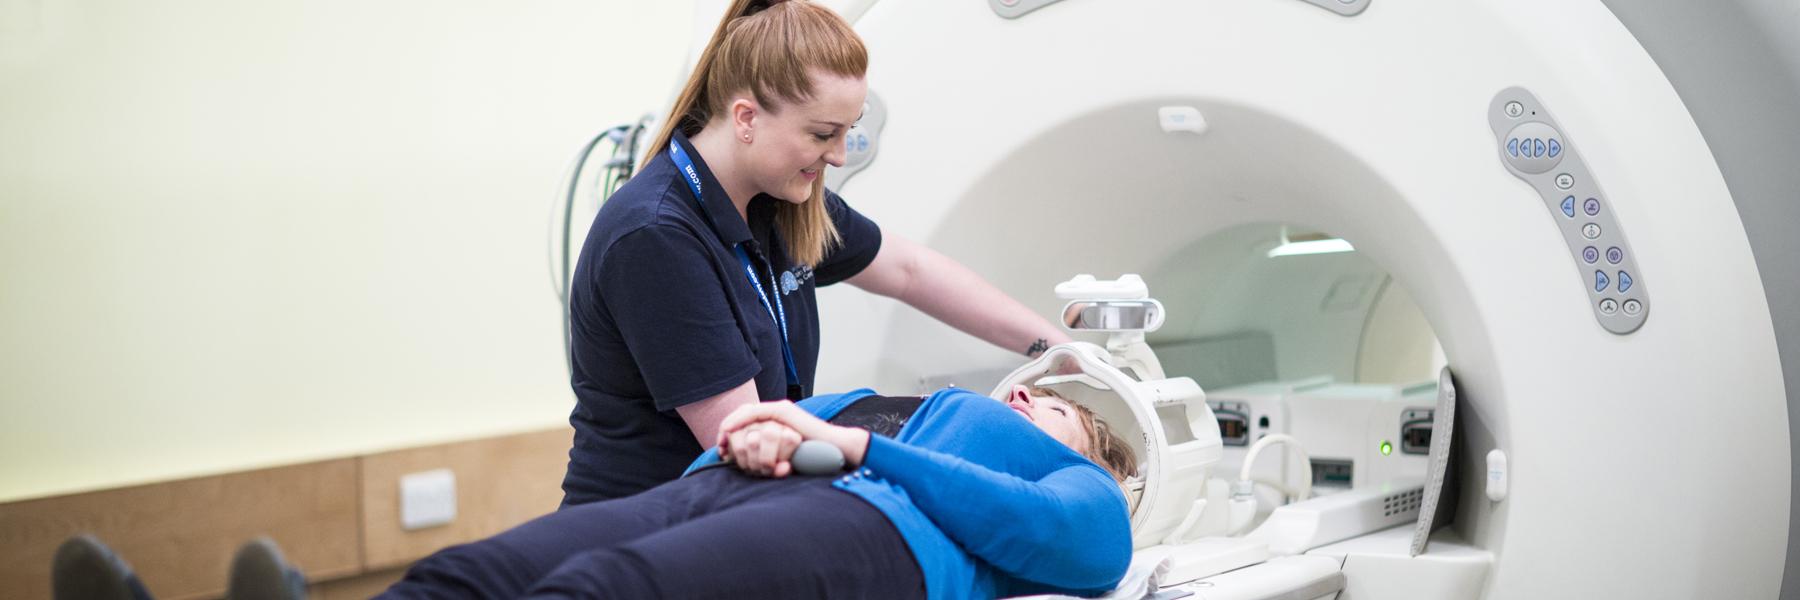 A radiographer helping a person into an MRI machine